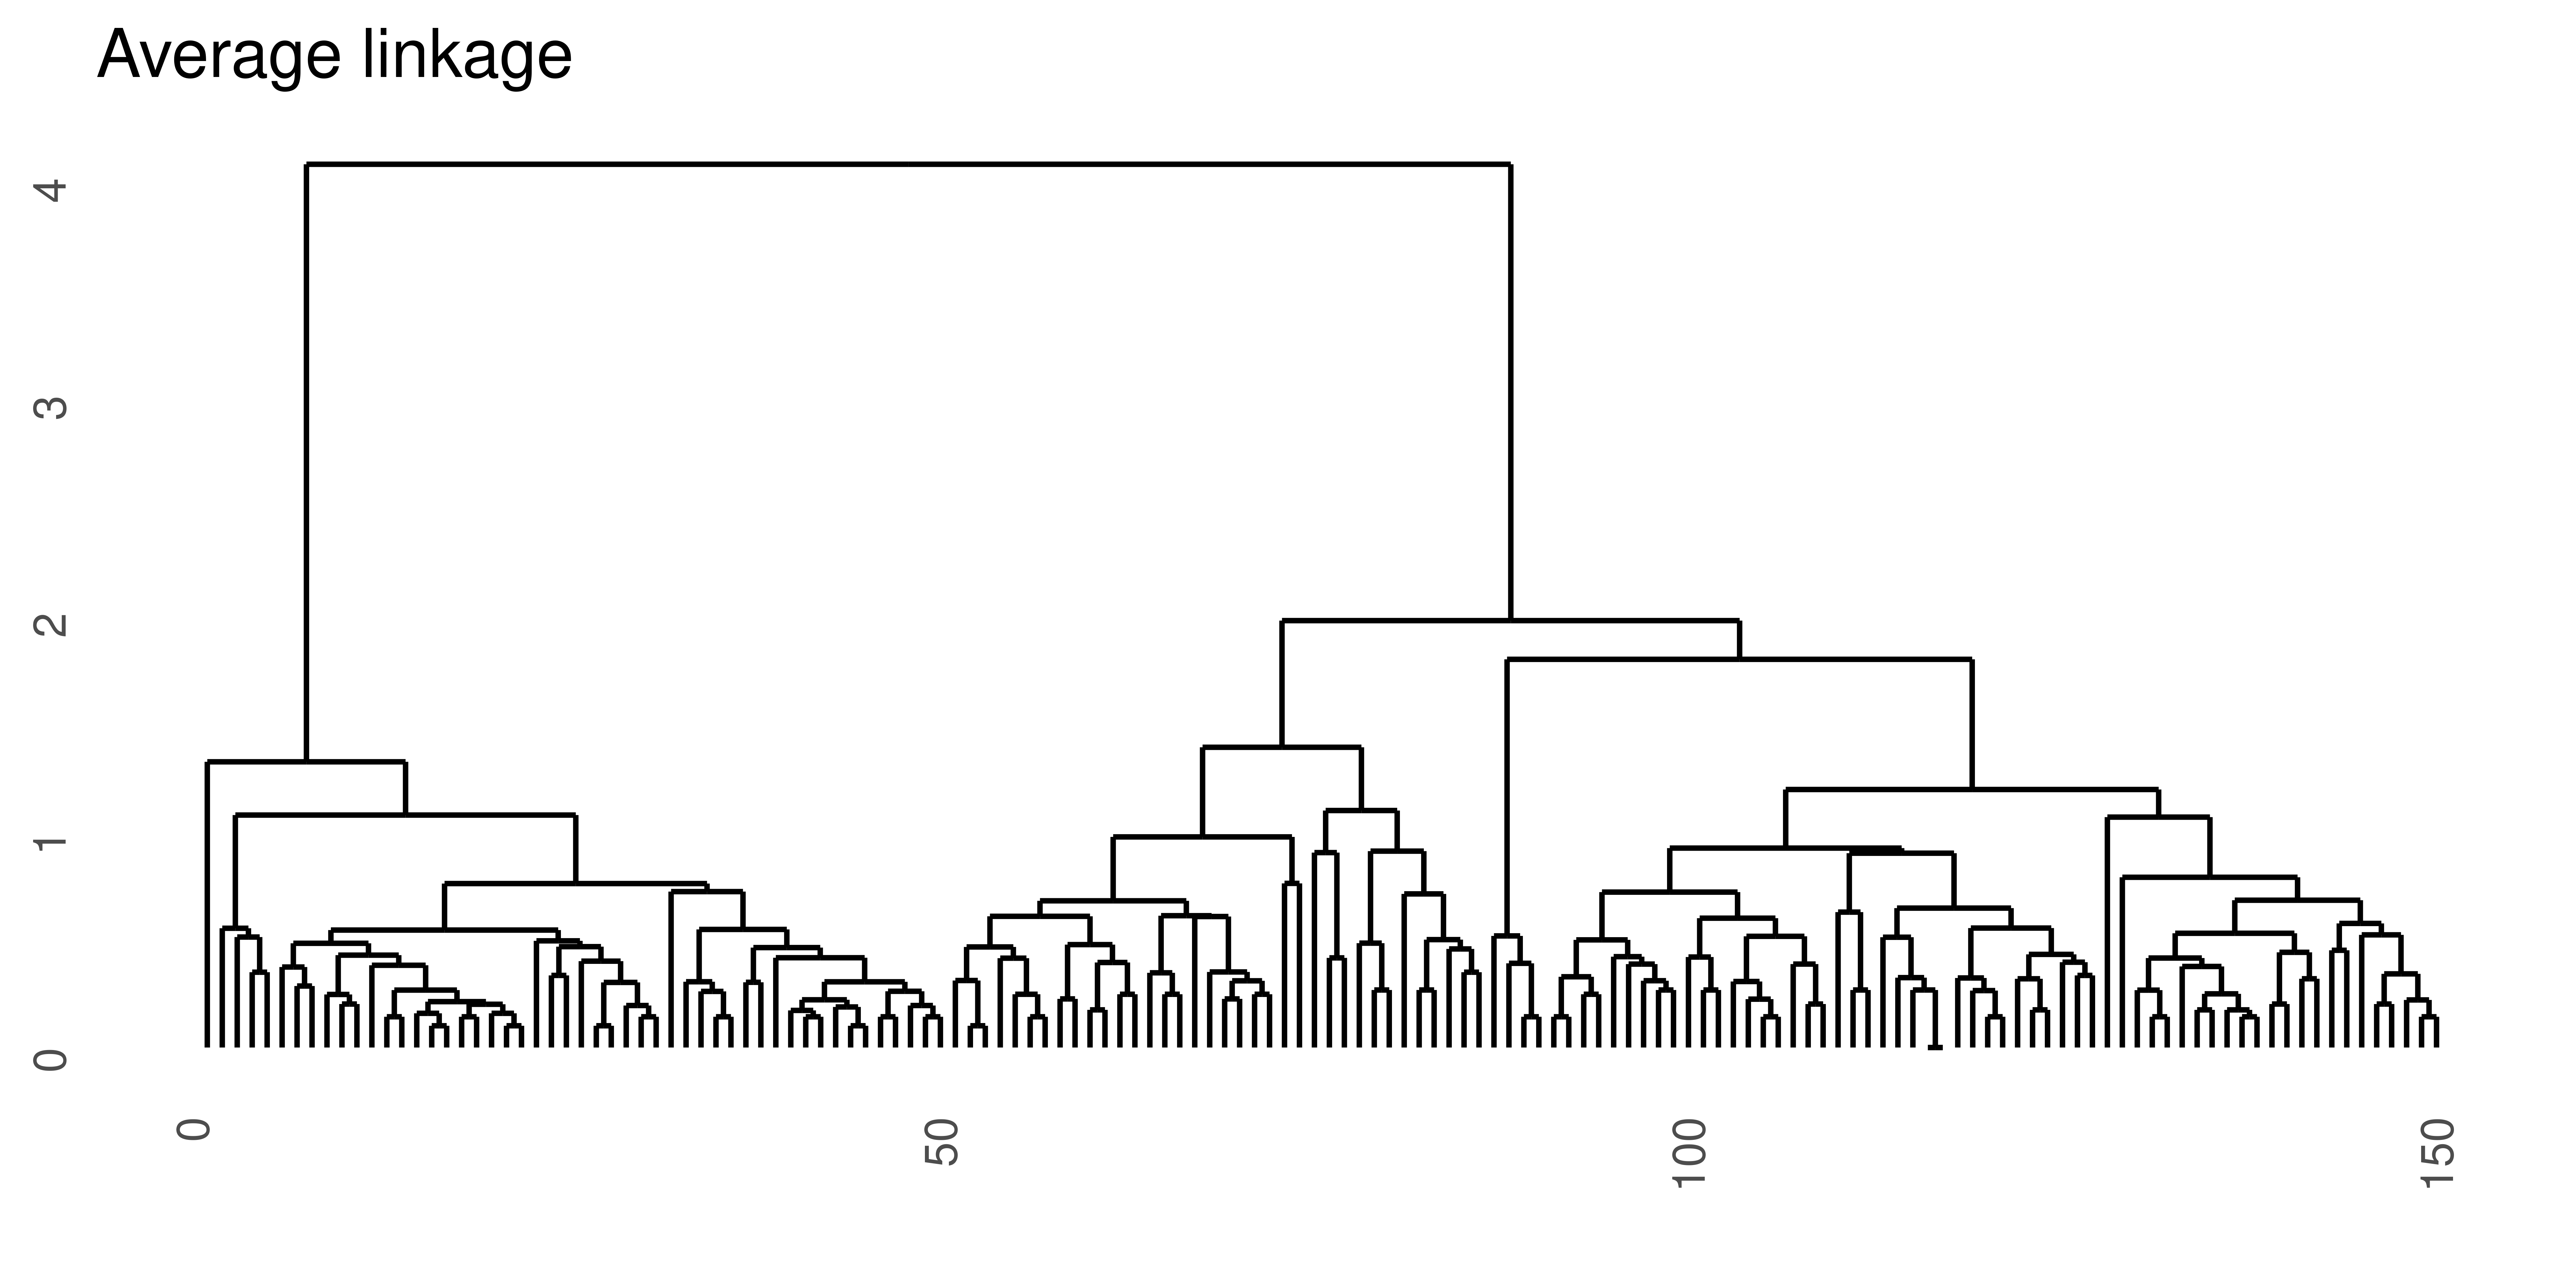 Hierarchical clustering of the same data set using Euclidean distance and four different linkage methods.